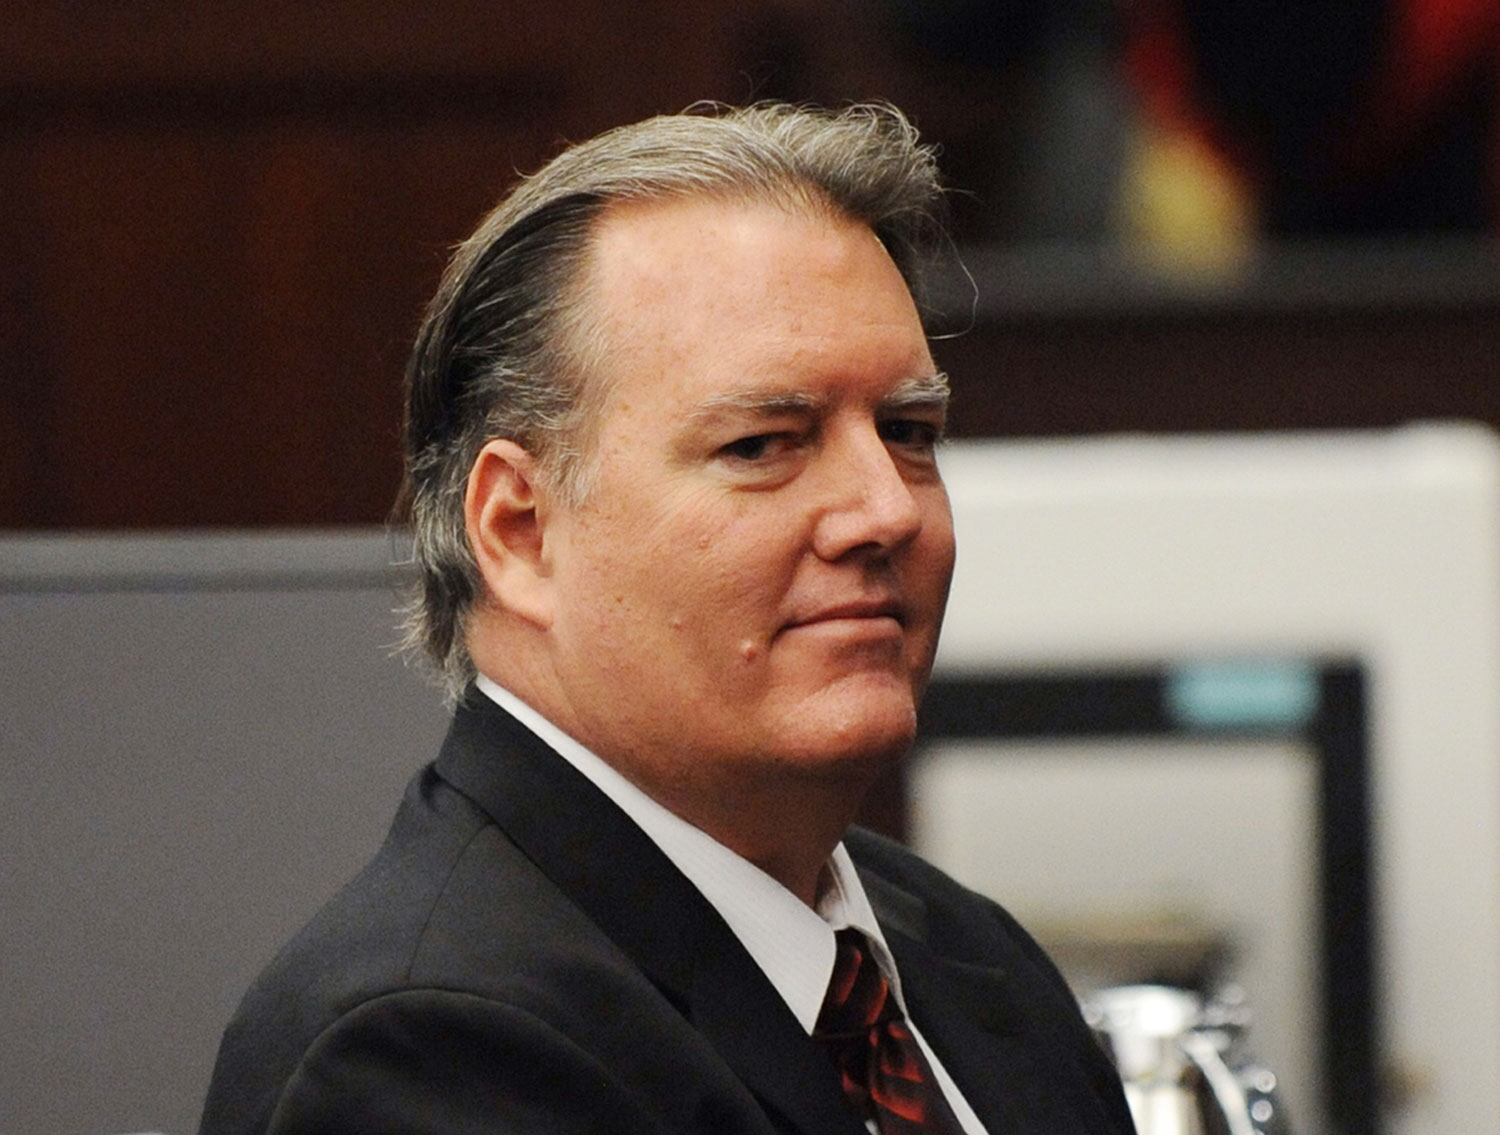 Michael Dunn Was Found Guilty—but That’s Not Enough to Ensure Justice in an Unjust World